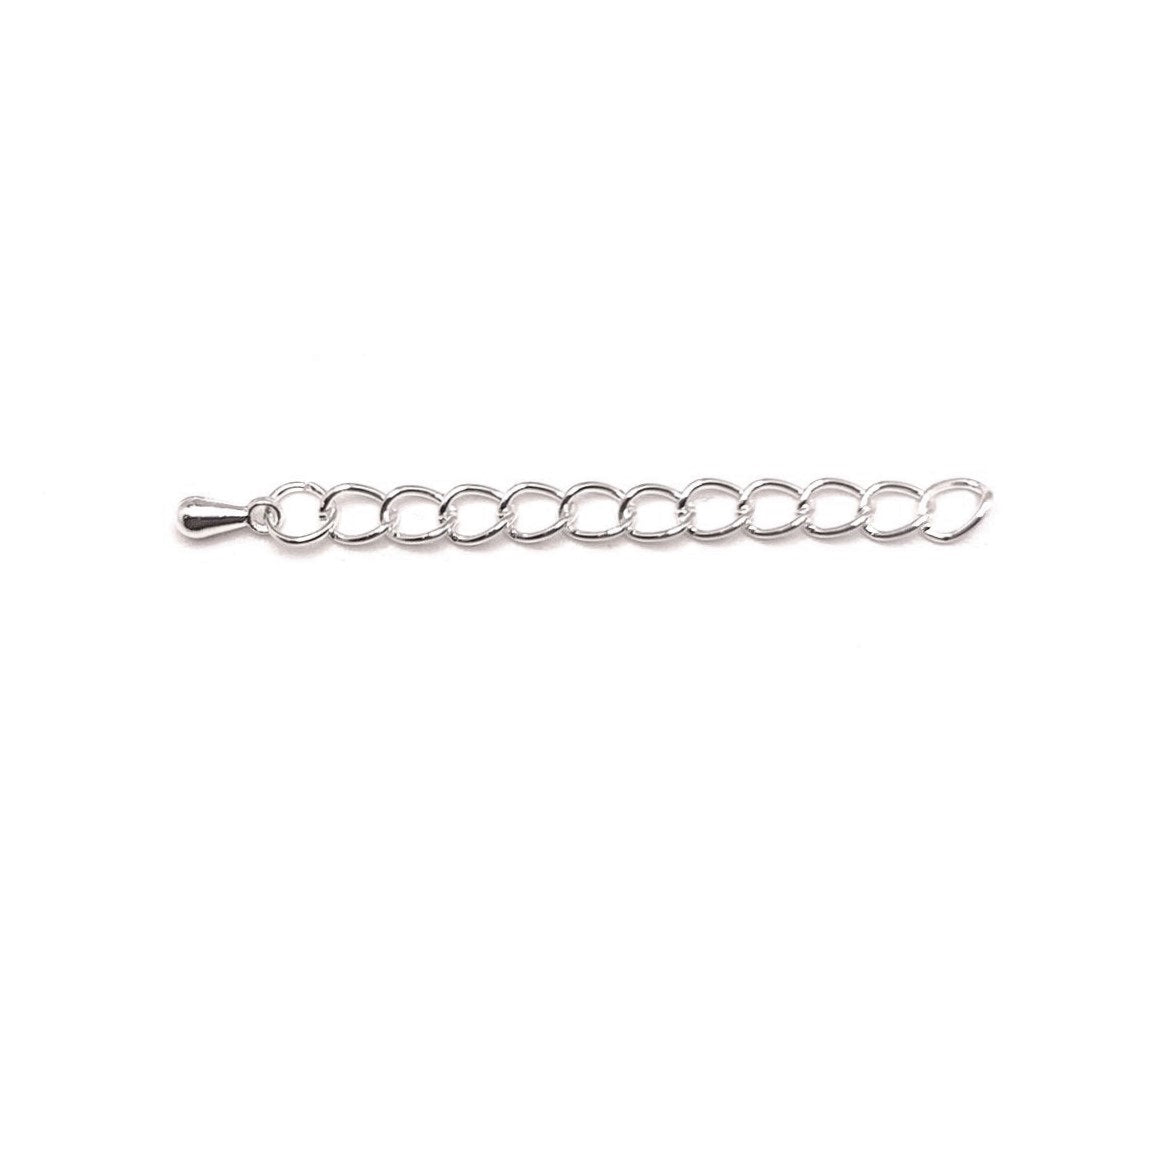 1, 4, 20 or 50 Pieces: Silver Plated Necklace Extenders, 6cm